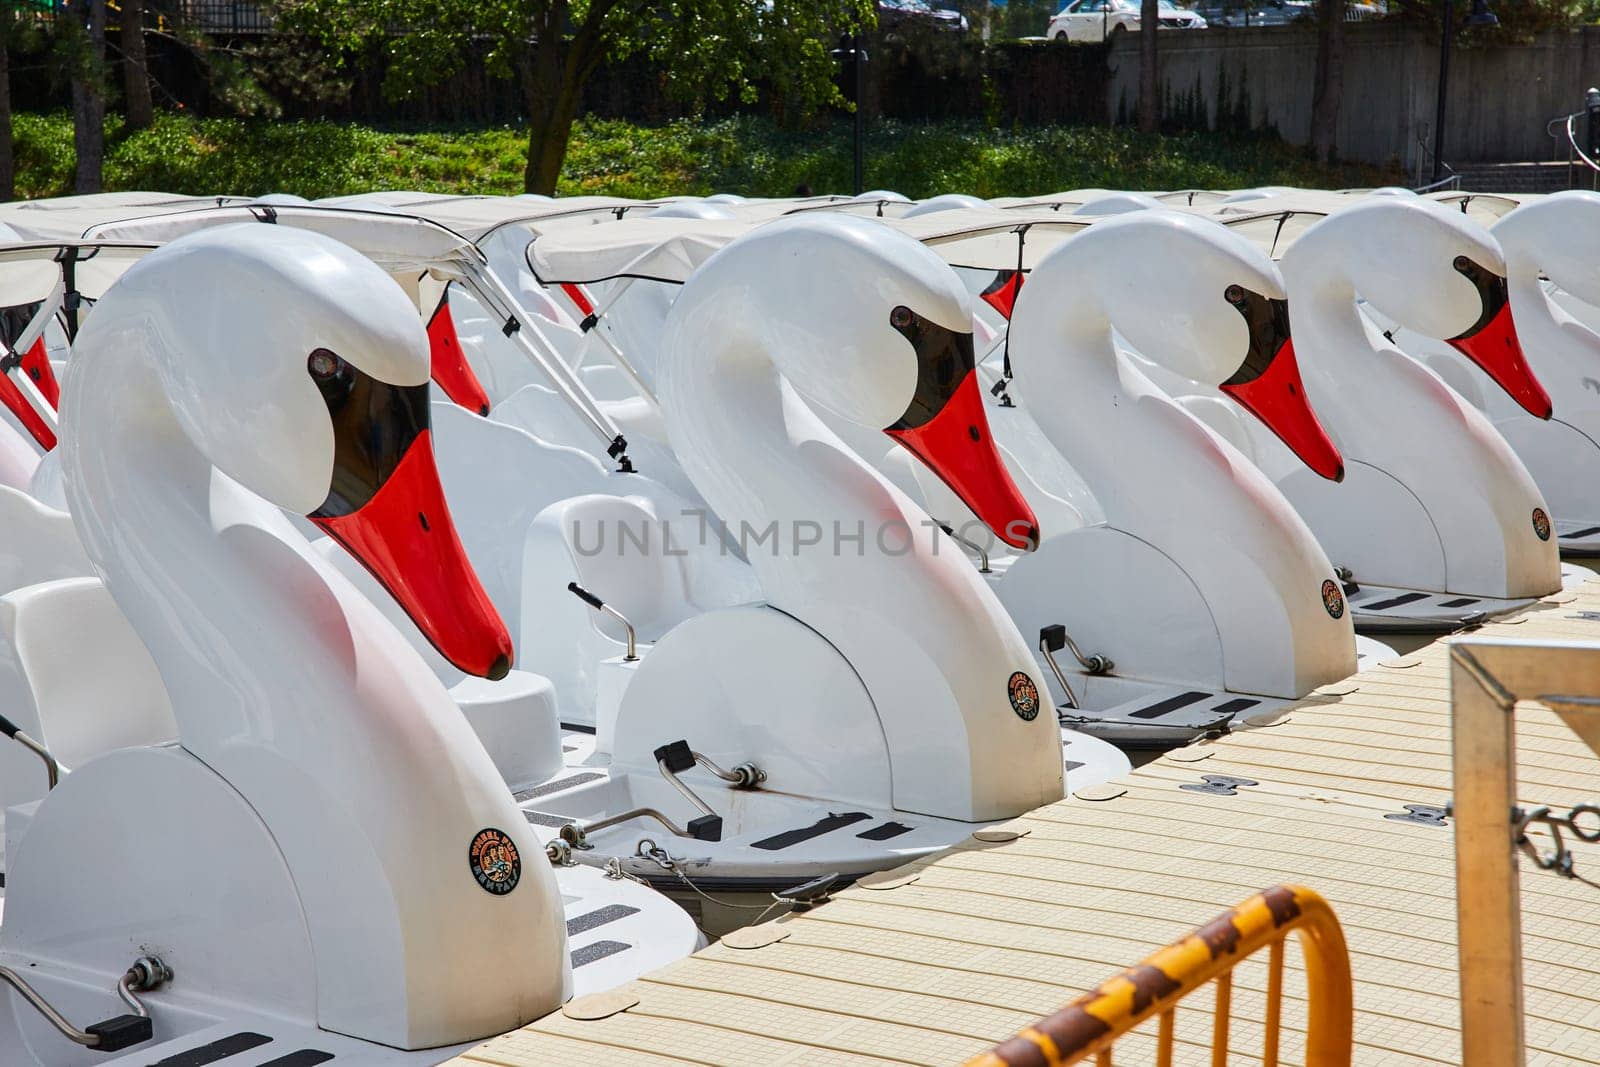 Swan Pedal Boats on Sunny Dock with Canopy Shadows by njproductions